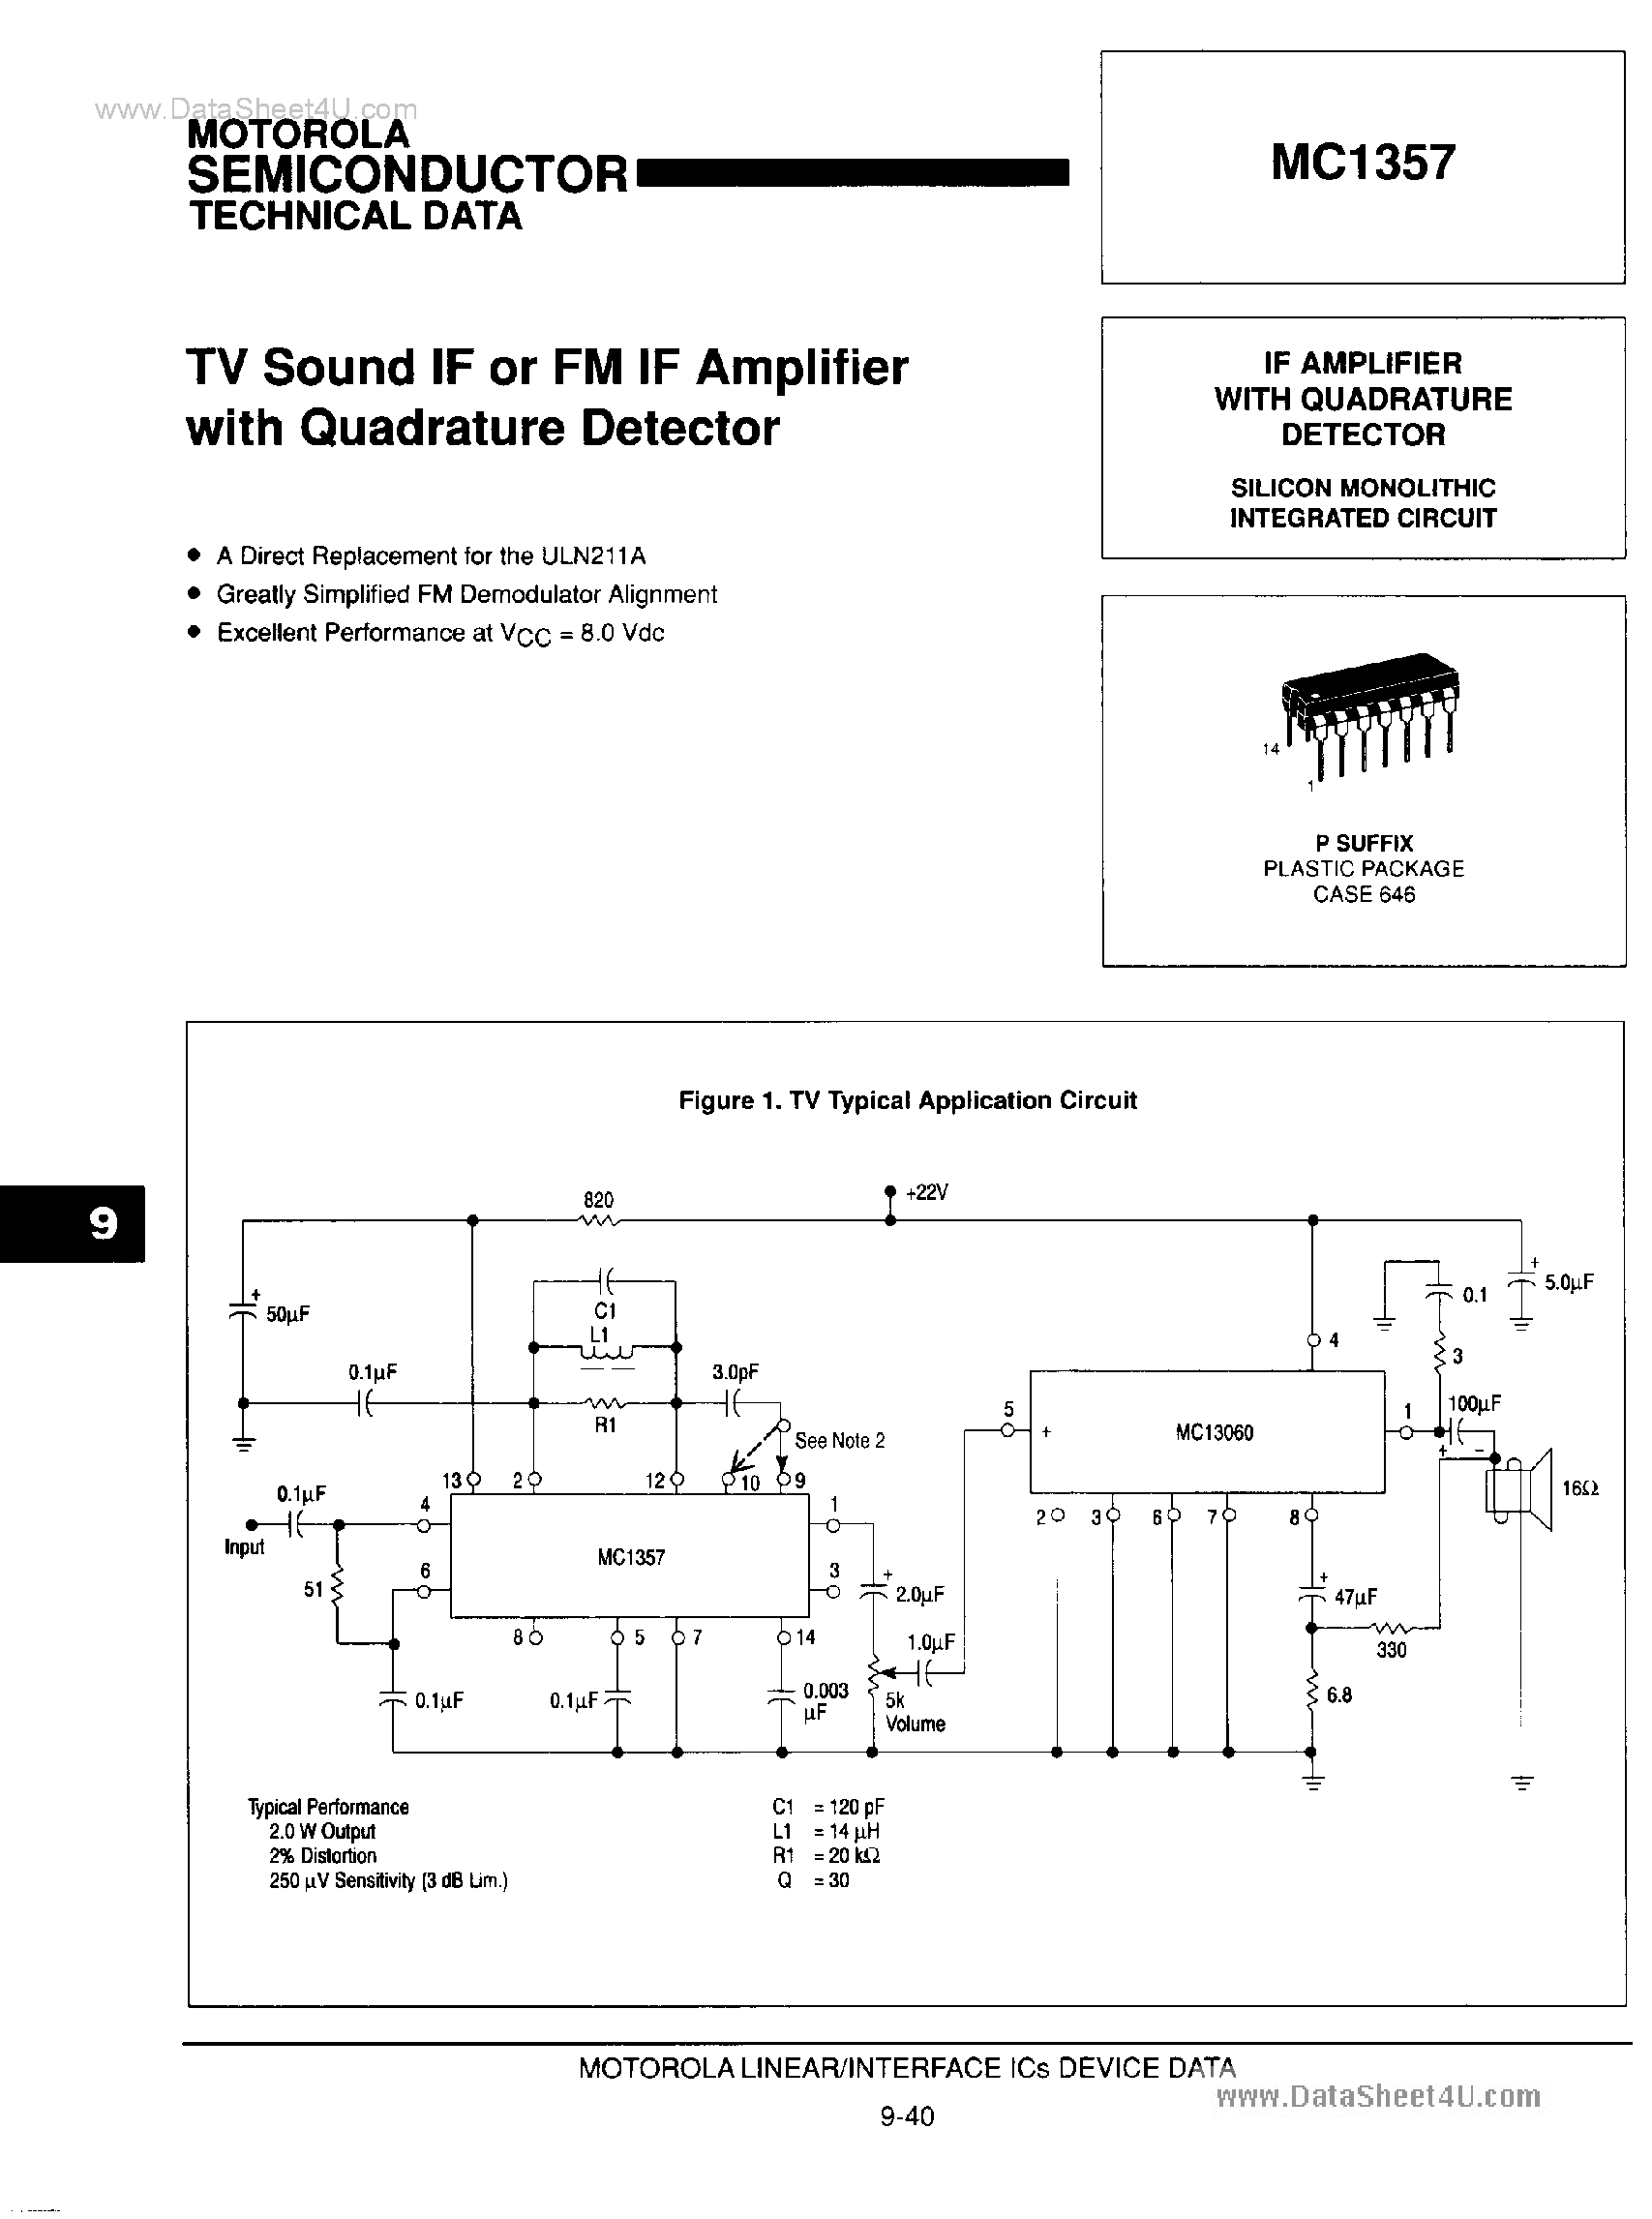 Datasheet MC1357 - TV Sound IF or FM IF Amplifier page 1